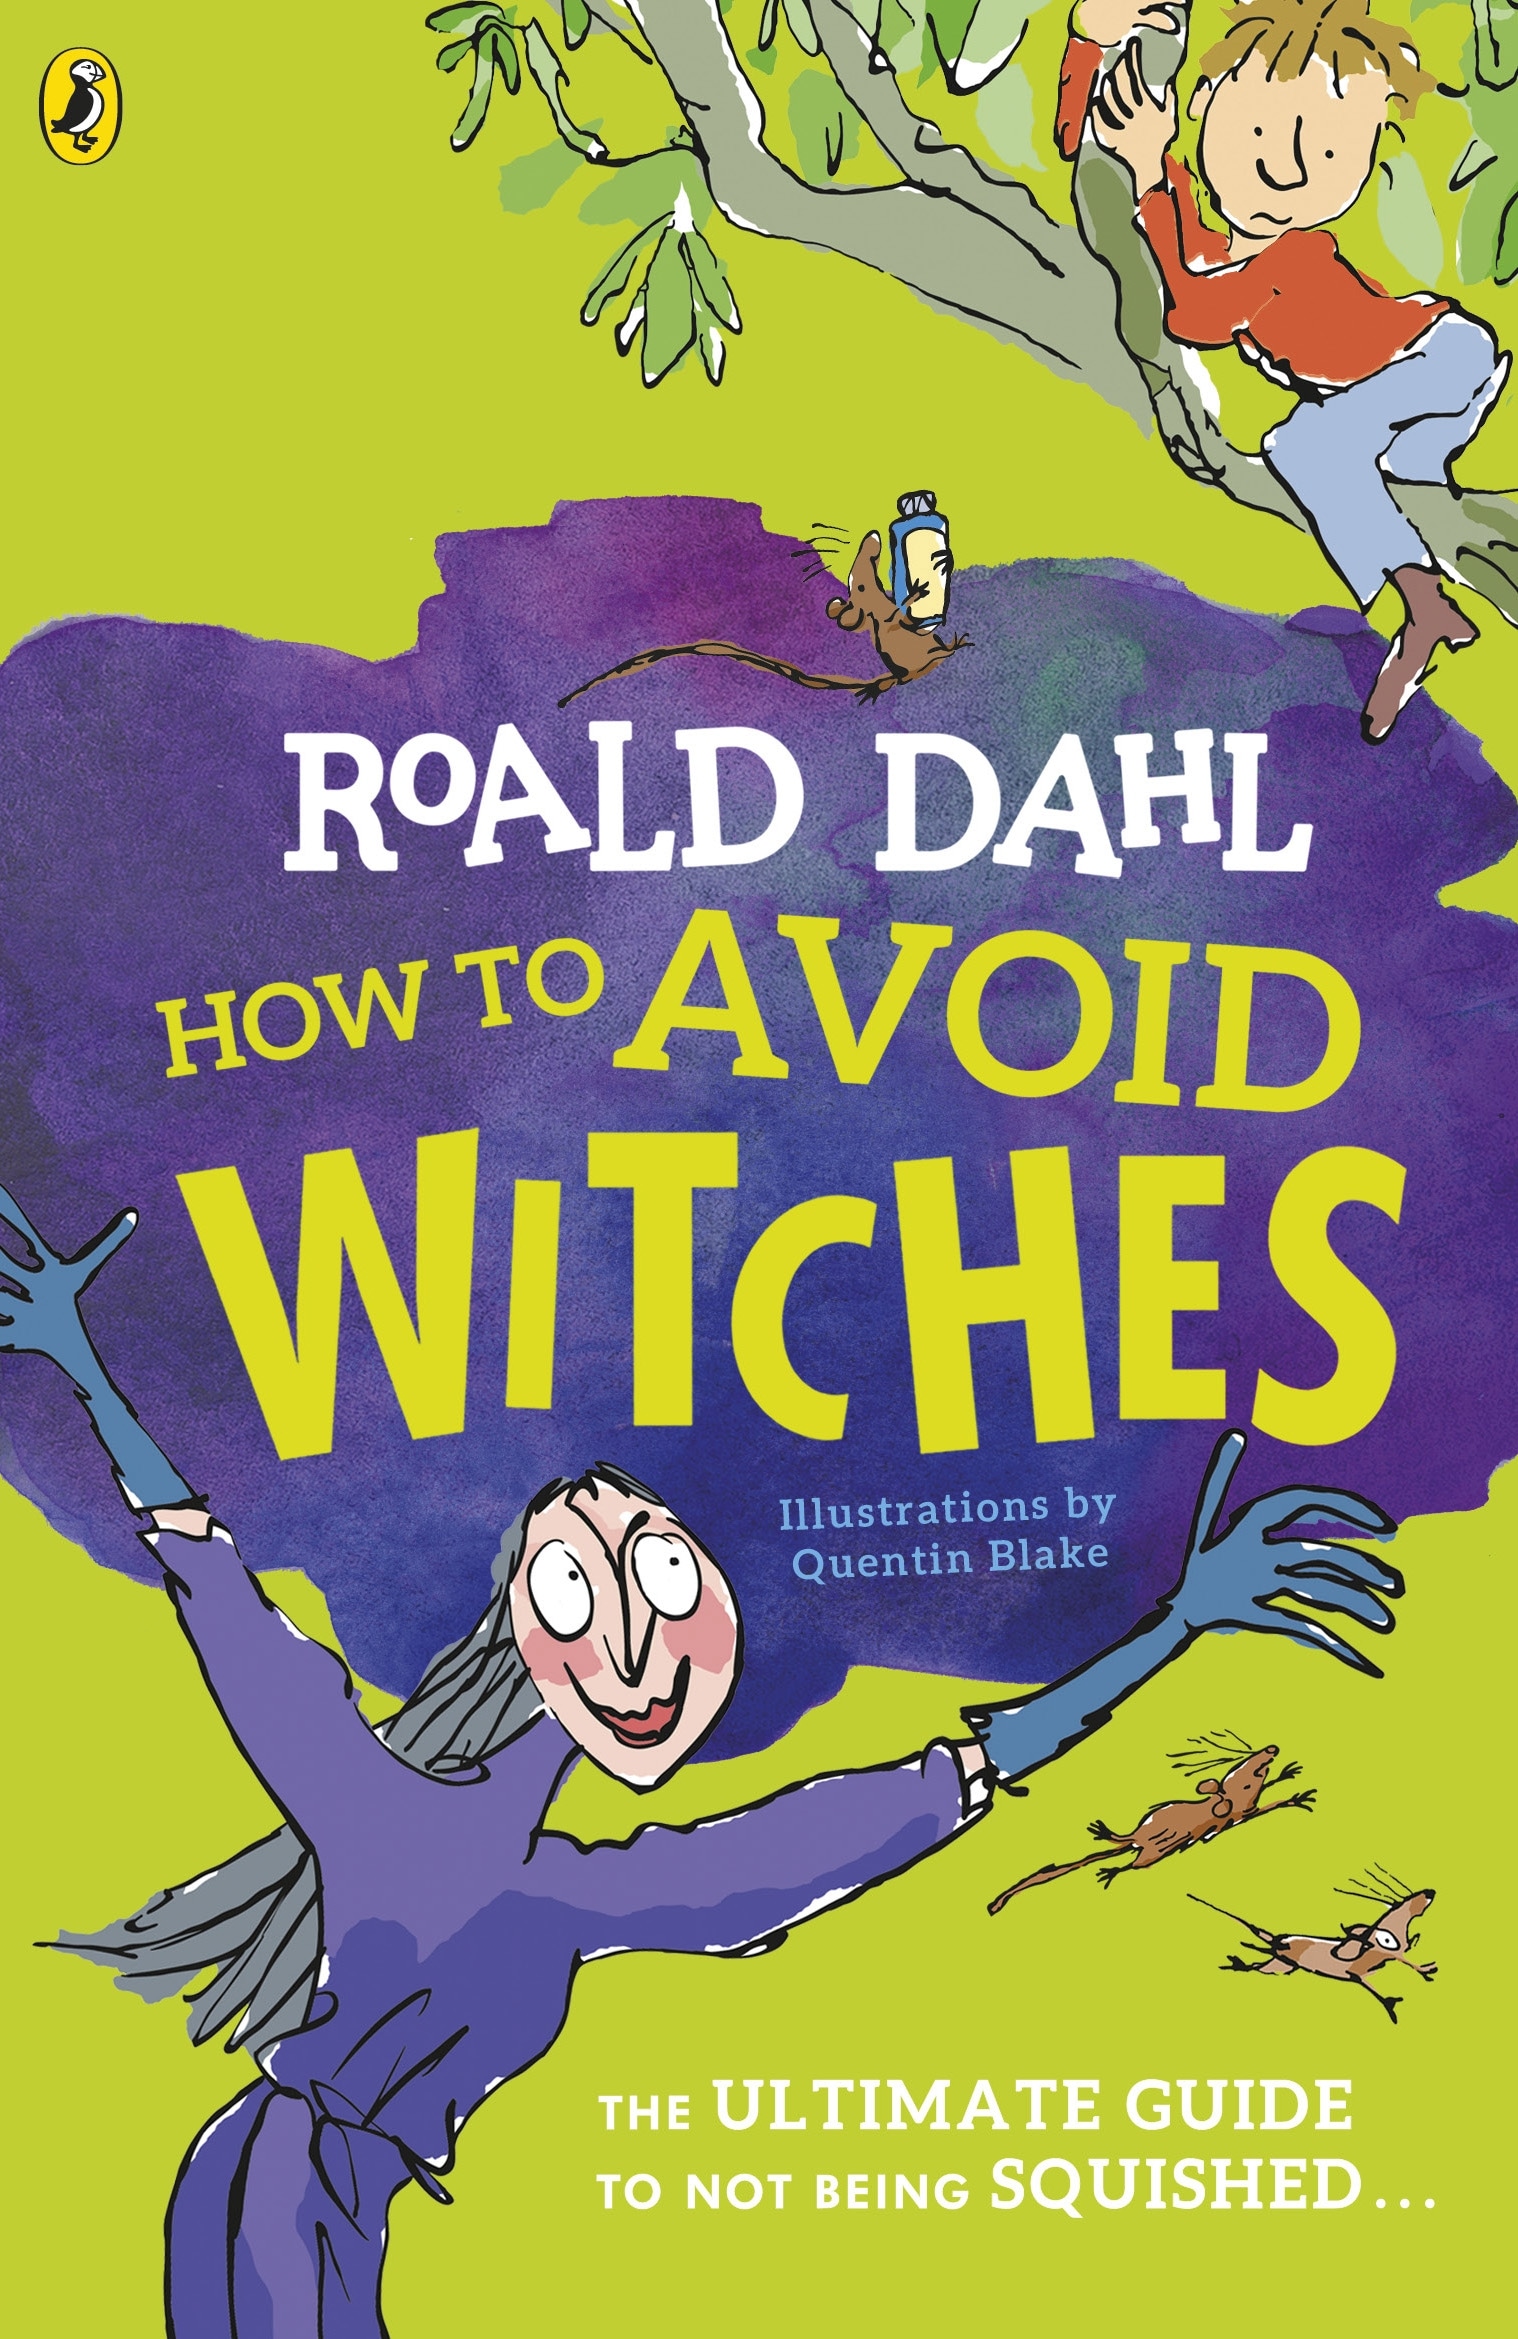 Book “How To Avoid Witches” by Roald Dahl — September 17, 2020